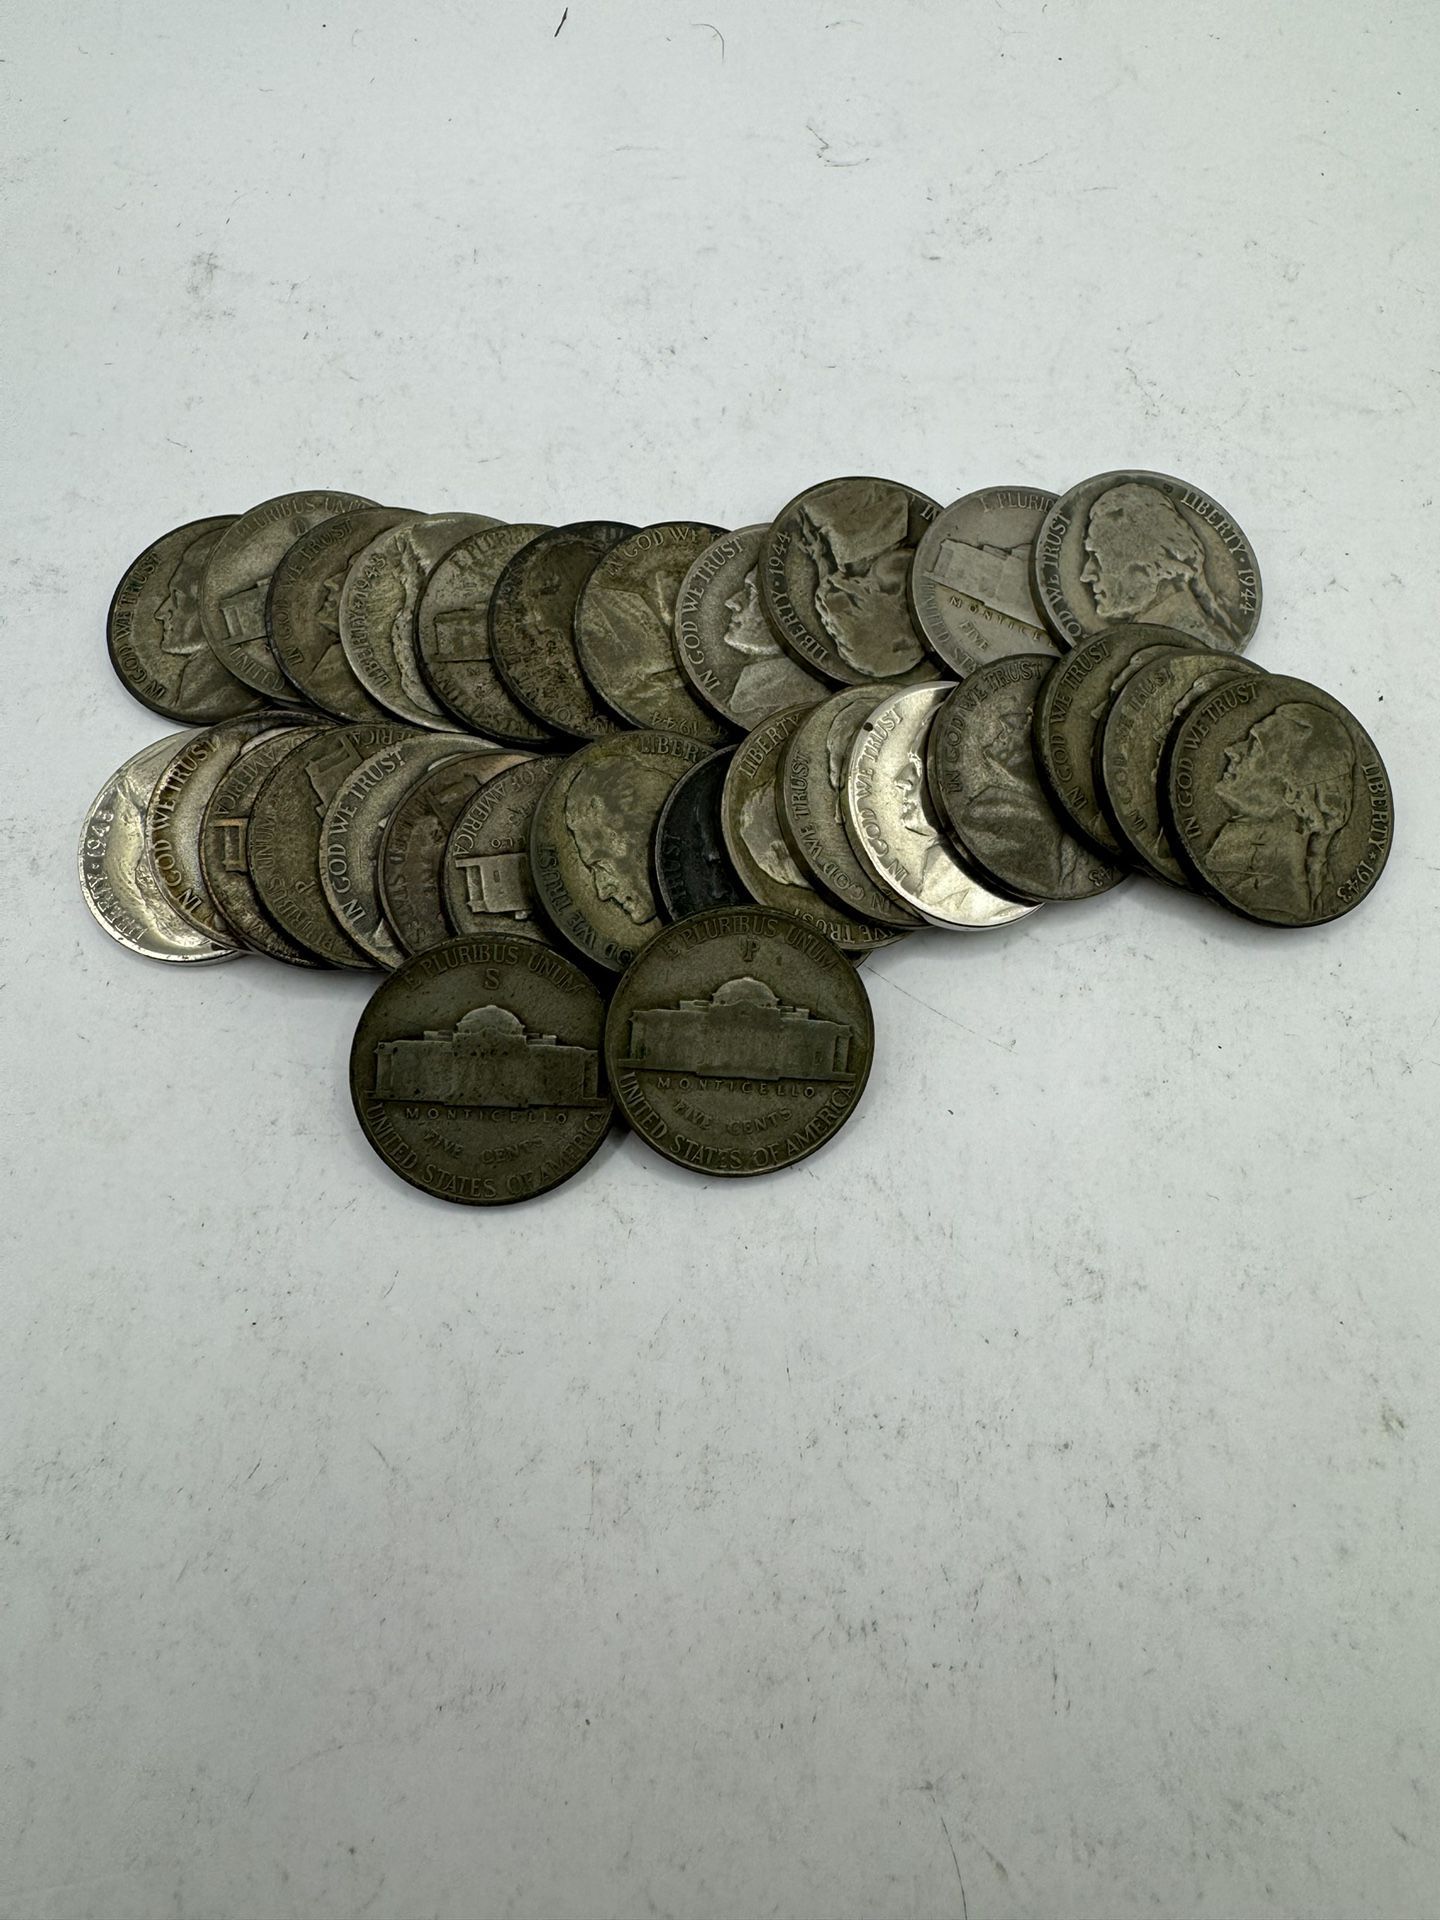 30 Silver War Nickels Coins From 1942 To 1945 For Silver Melt Value